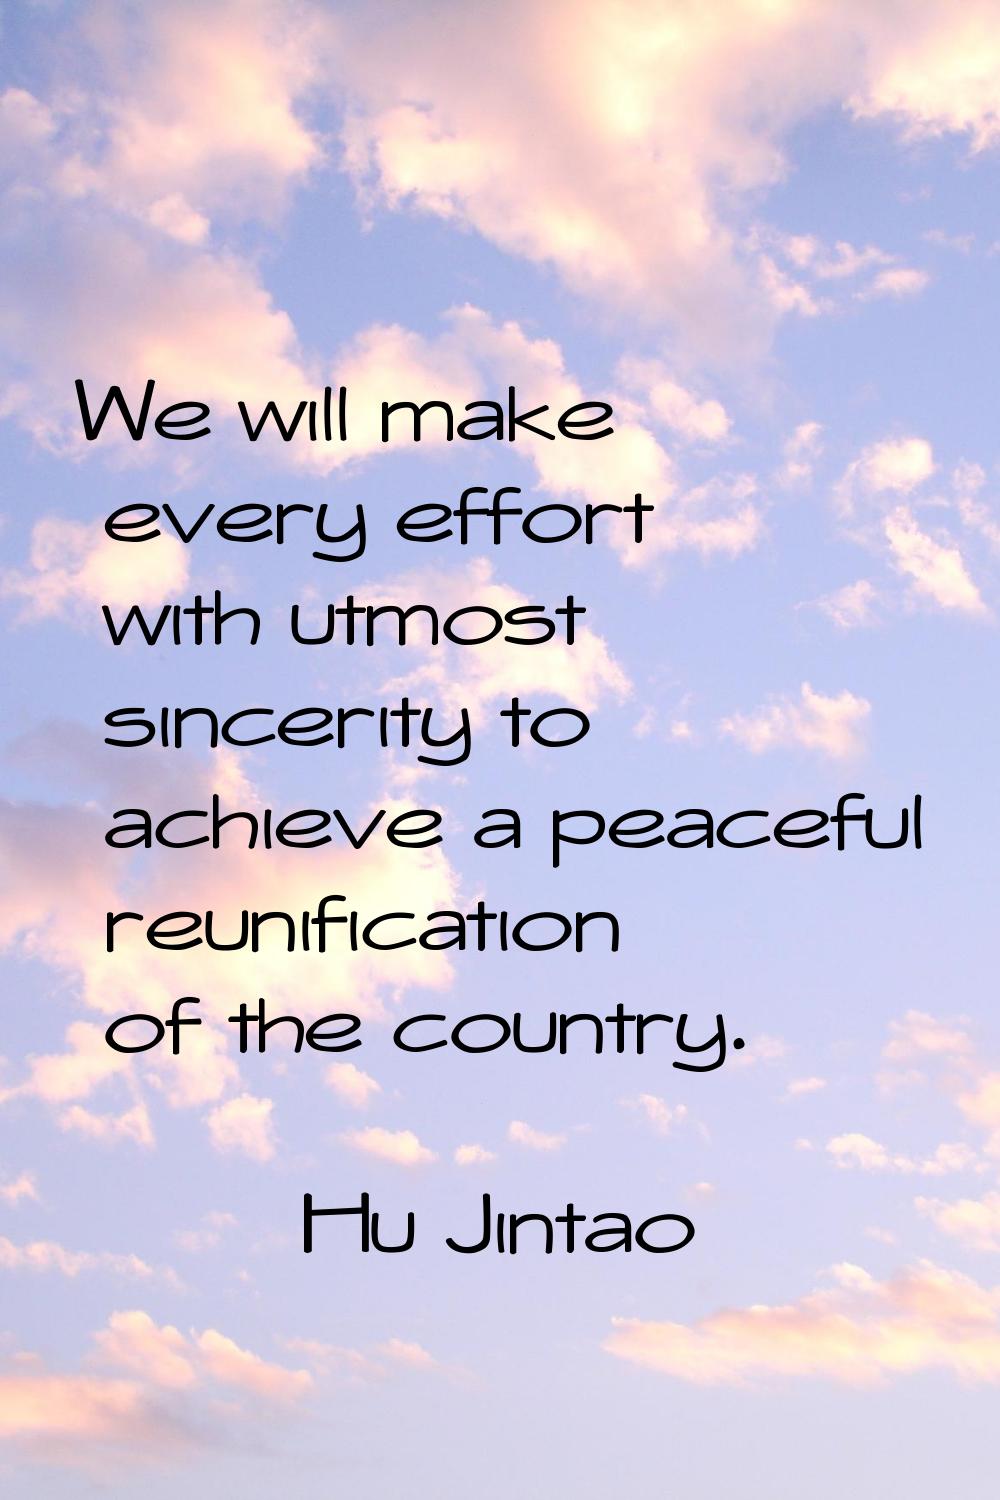 We will make every effort with utmost sincerity to achieve a peaceful reunification of the country.